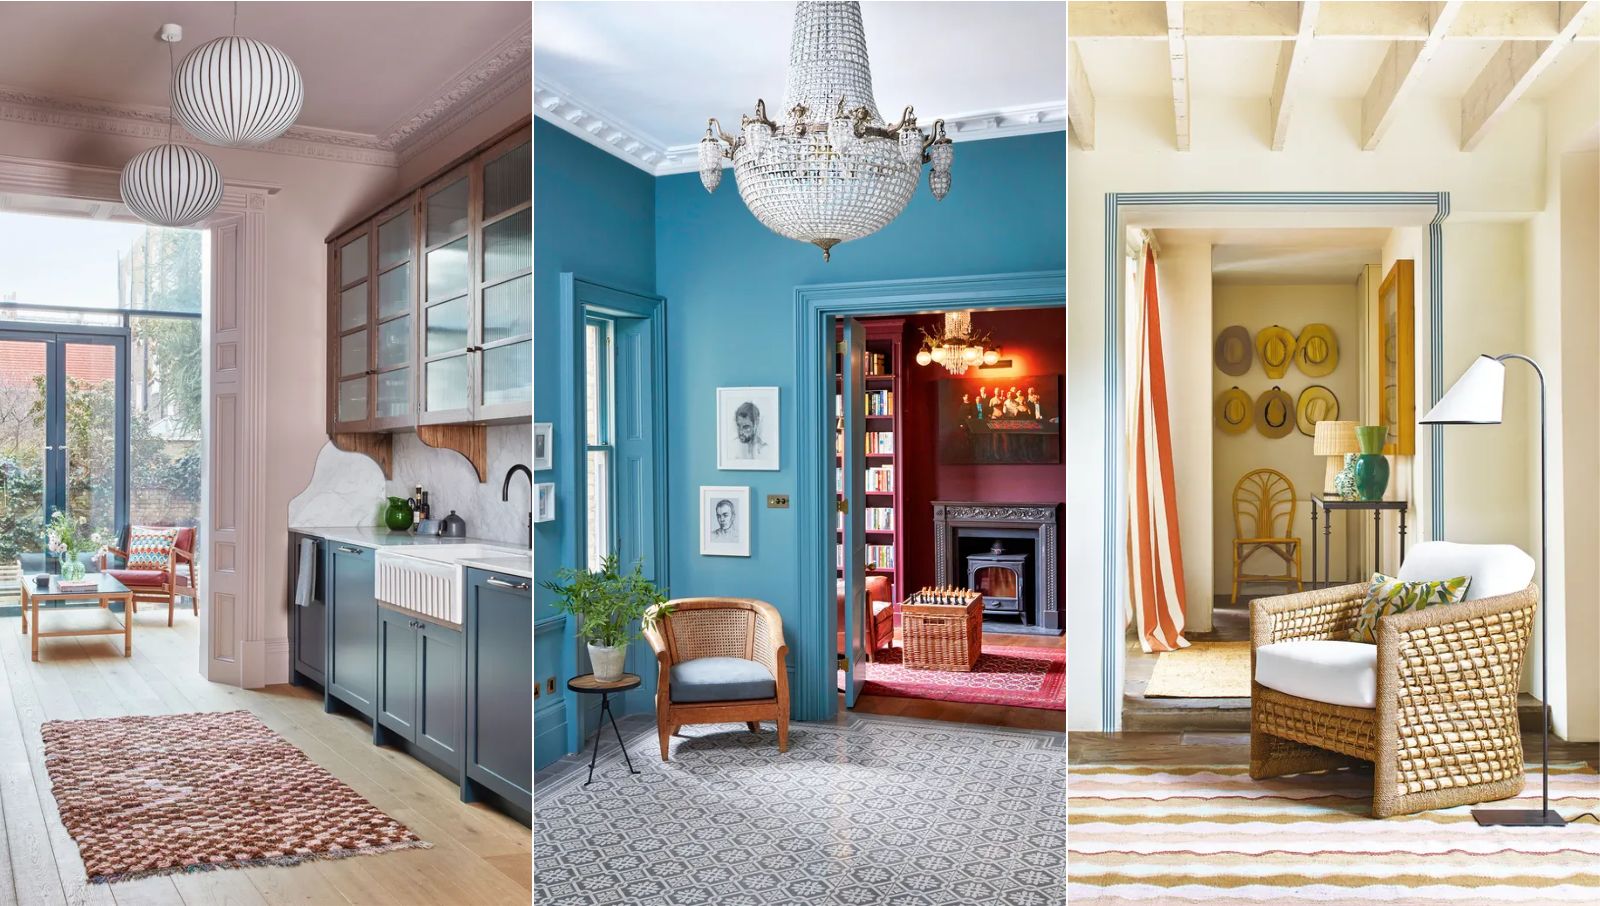 Interior Design Trends That Will Shape the Next Decade